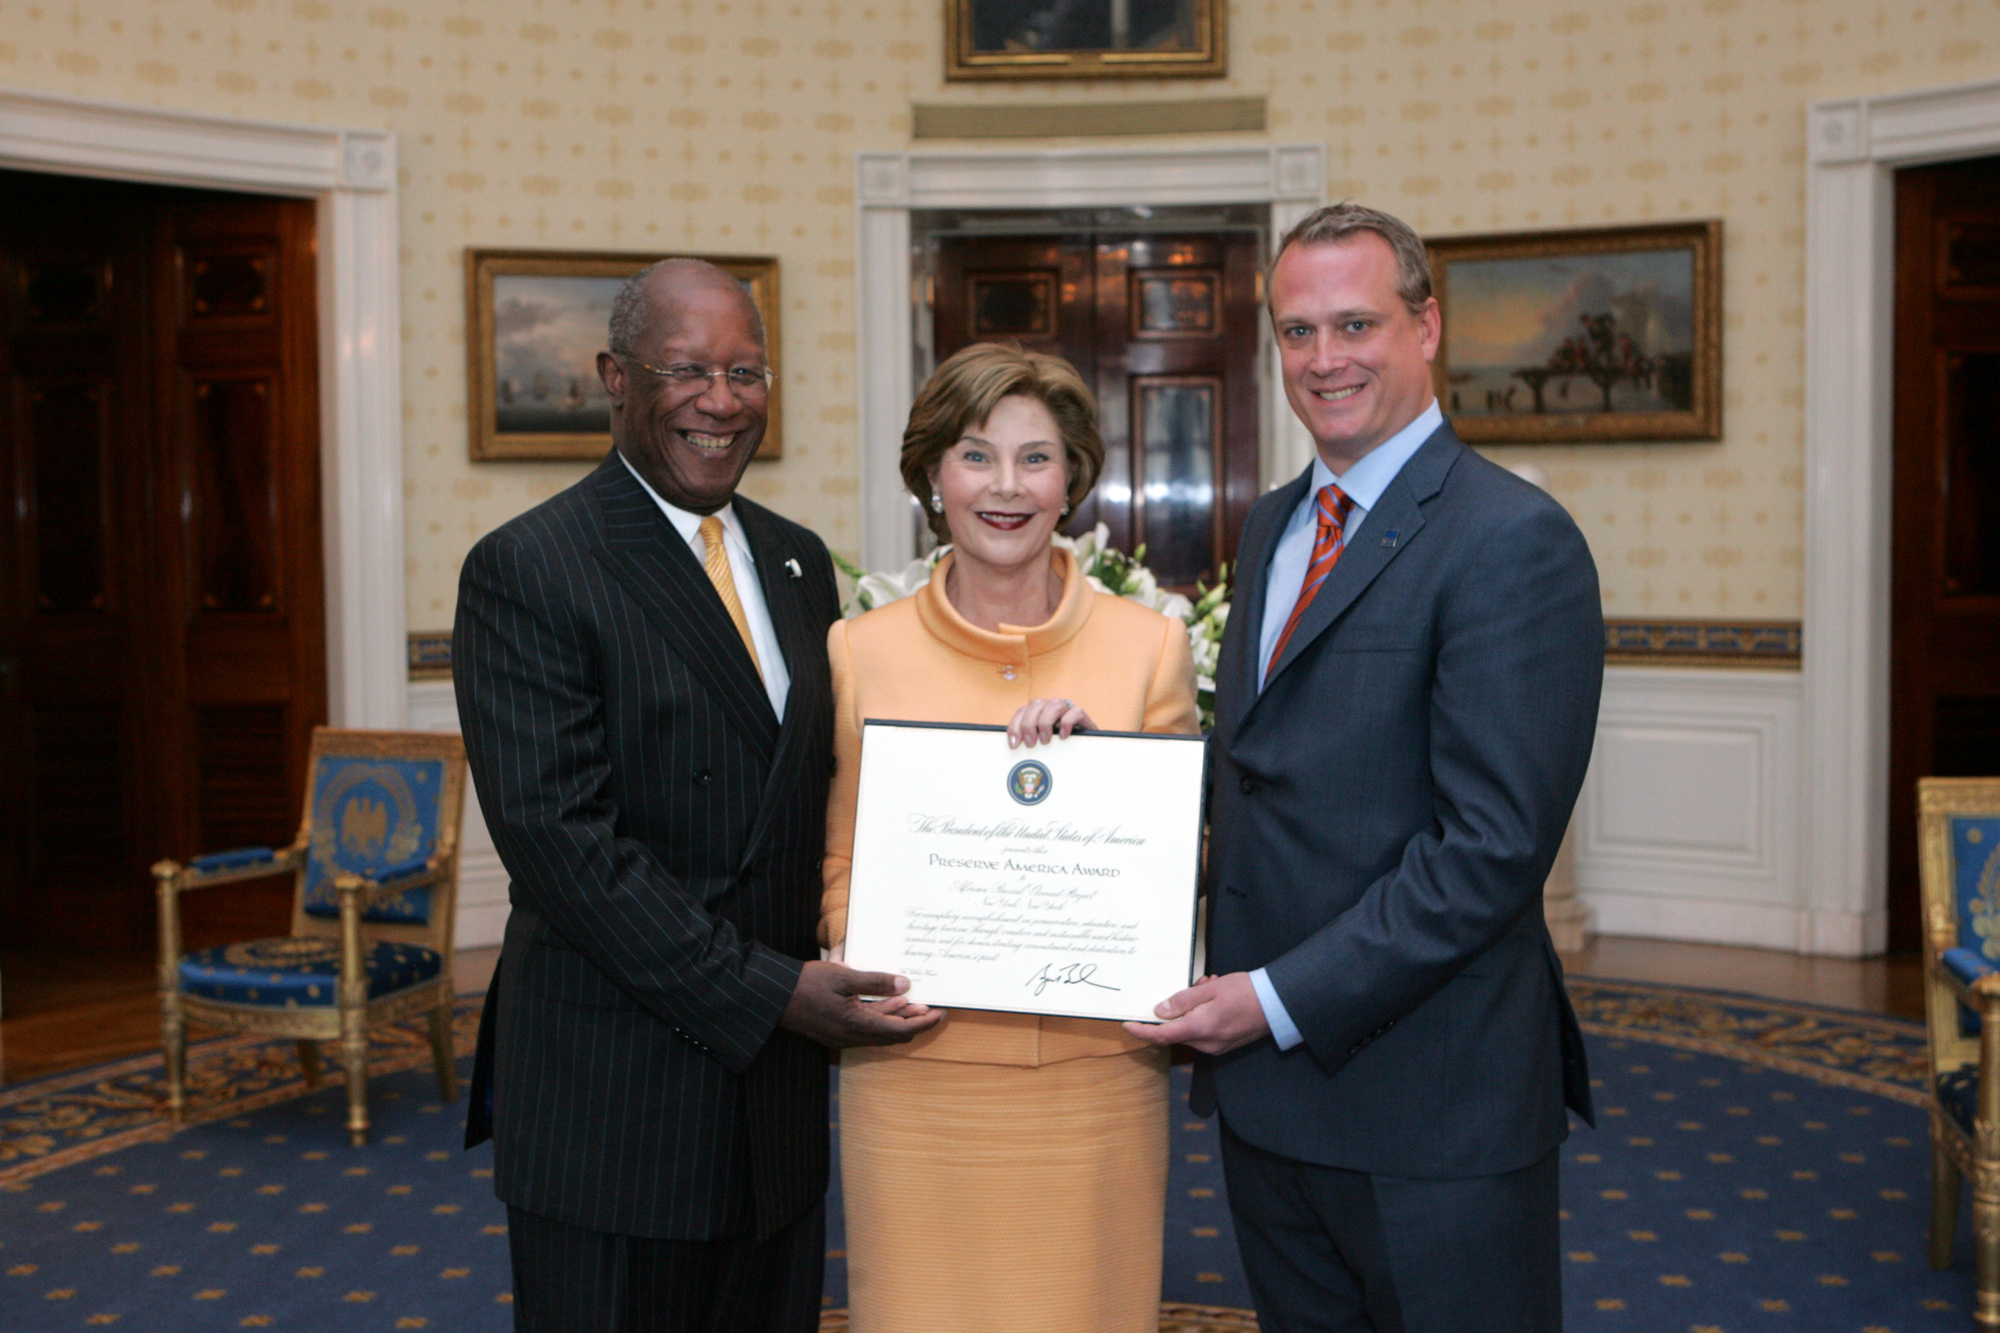 Laura Bush with Mark Dremel and Howard Dodson of the African Burial Ground Project